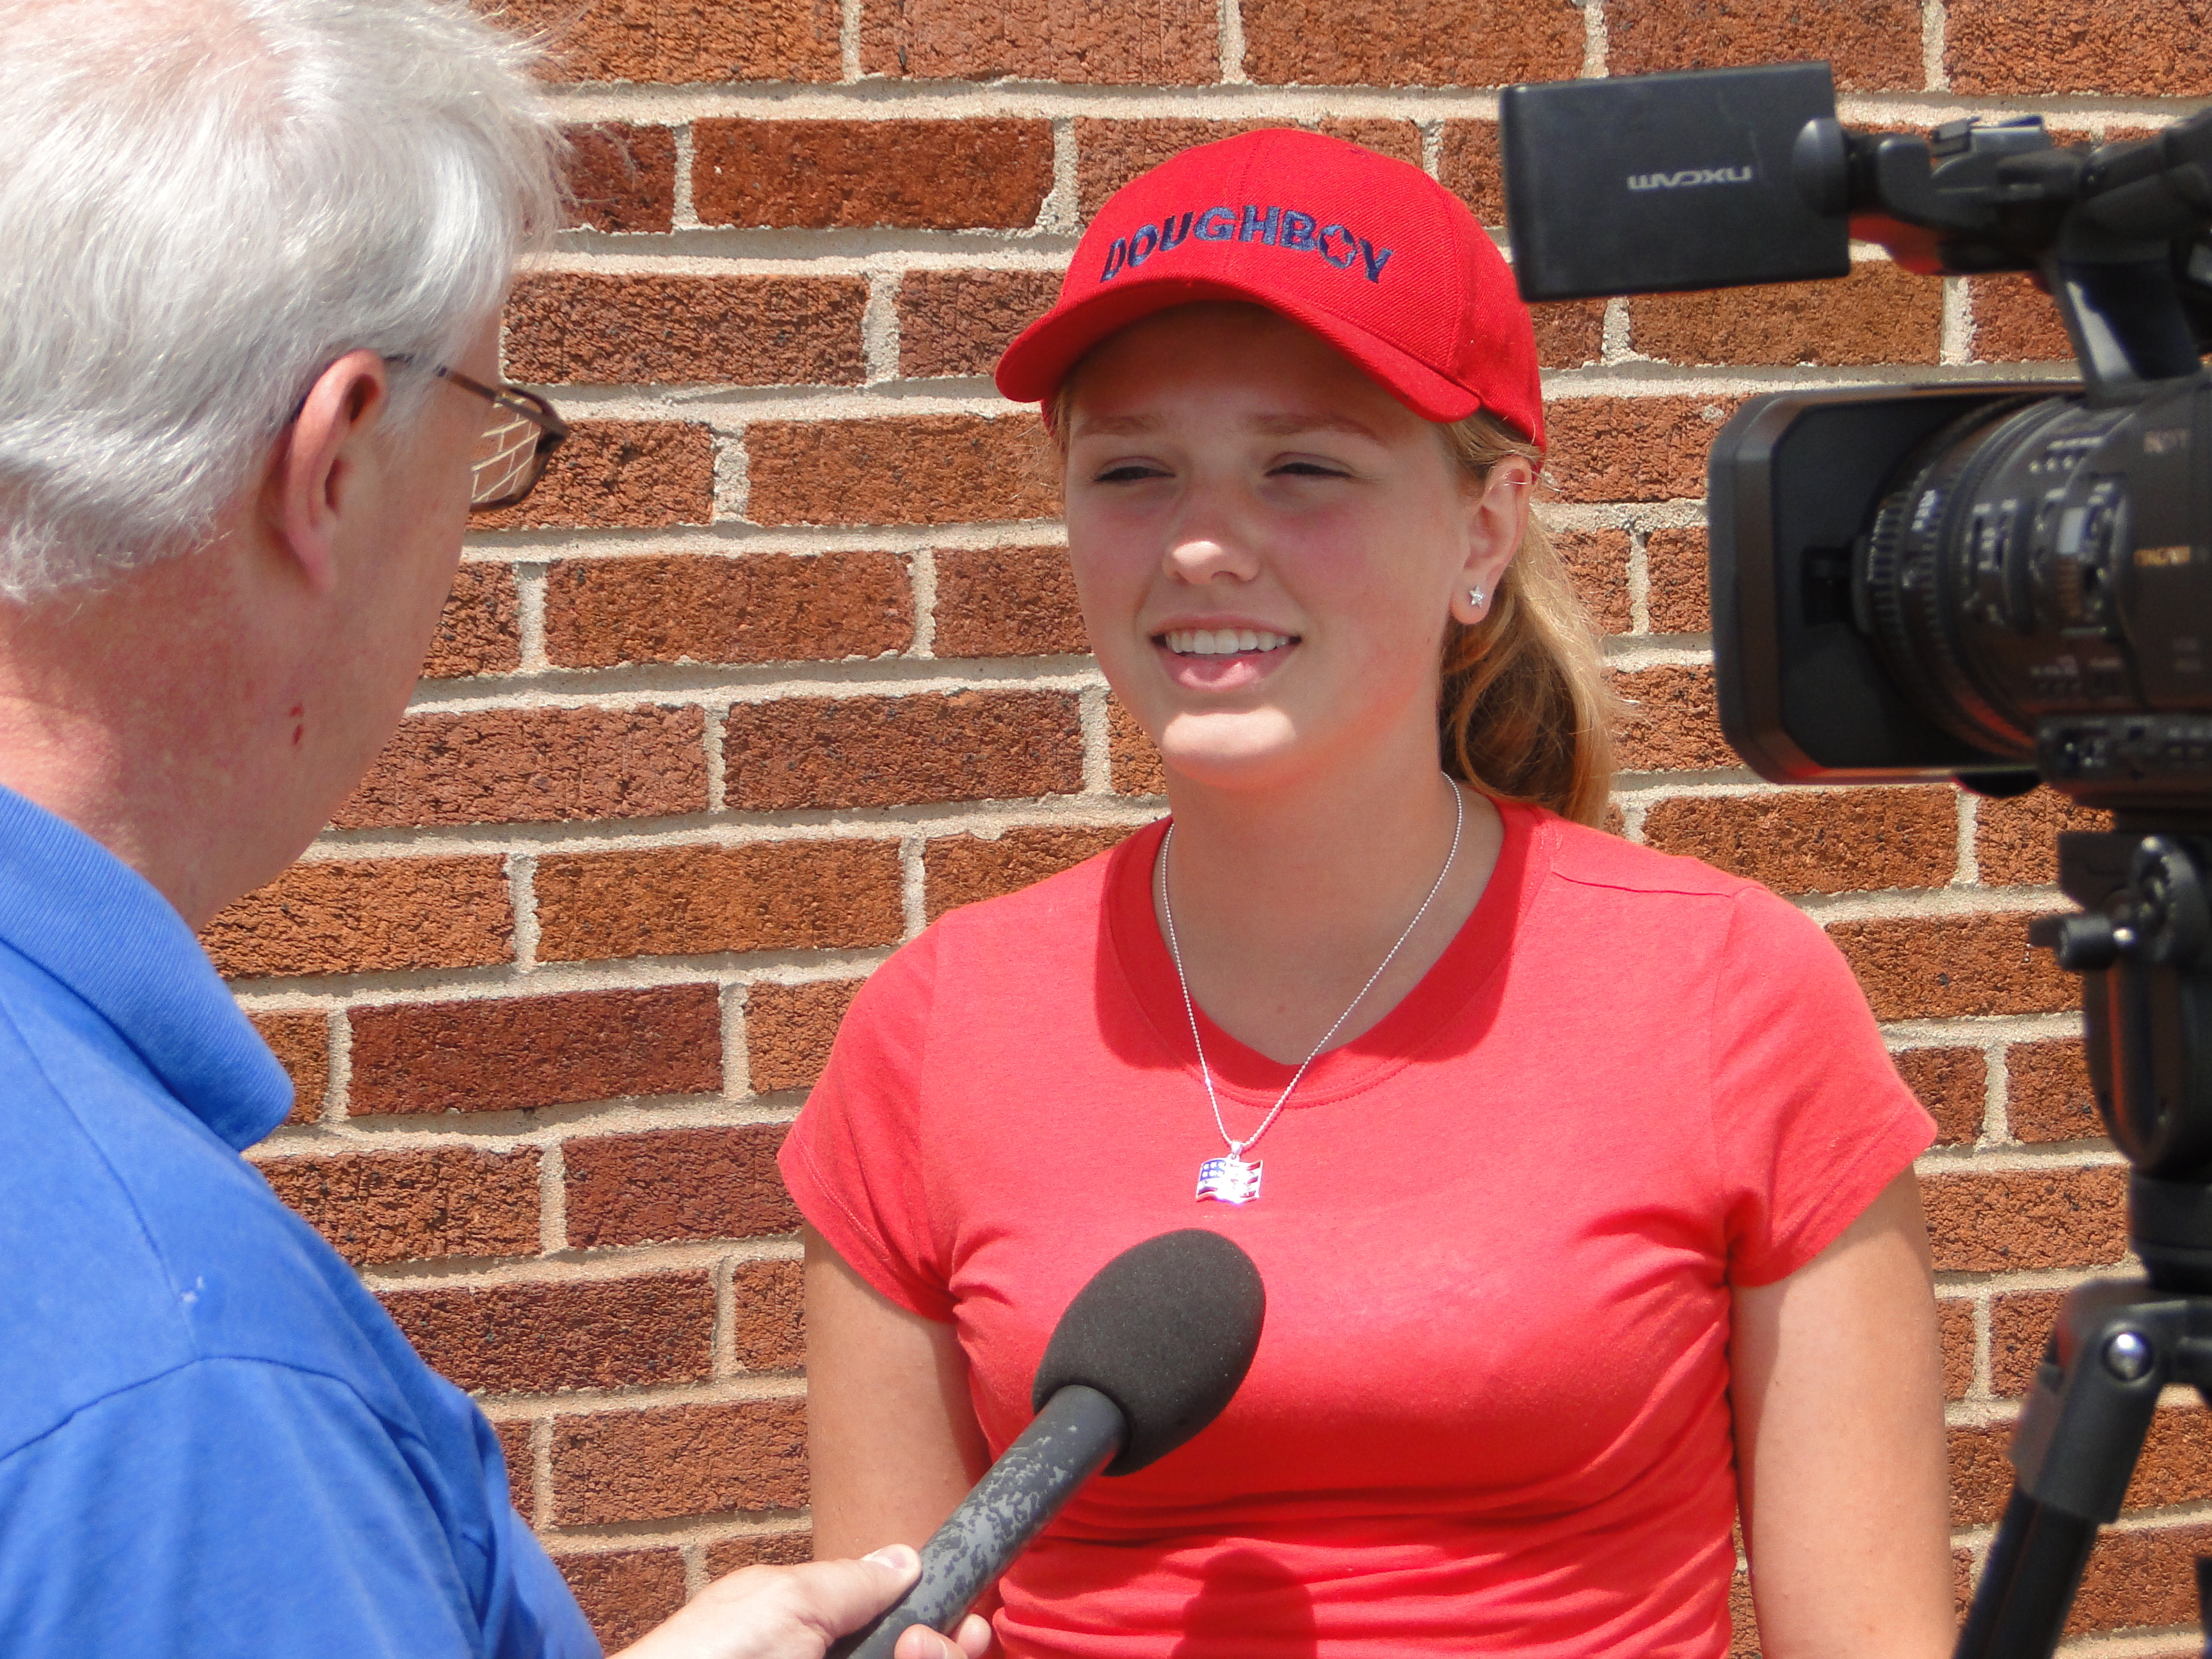 Emily is interviewed by WTAP in Parkersburg, WV